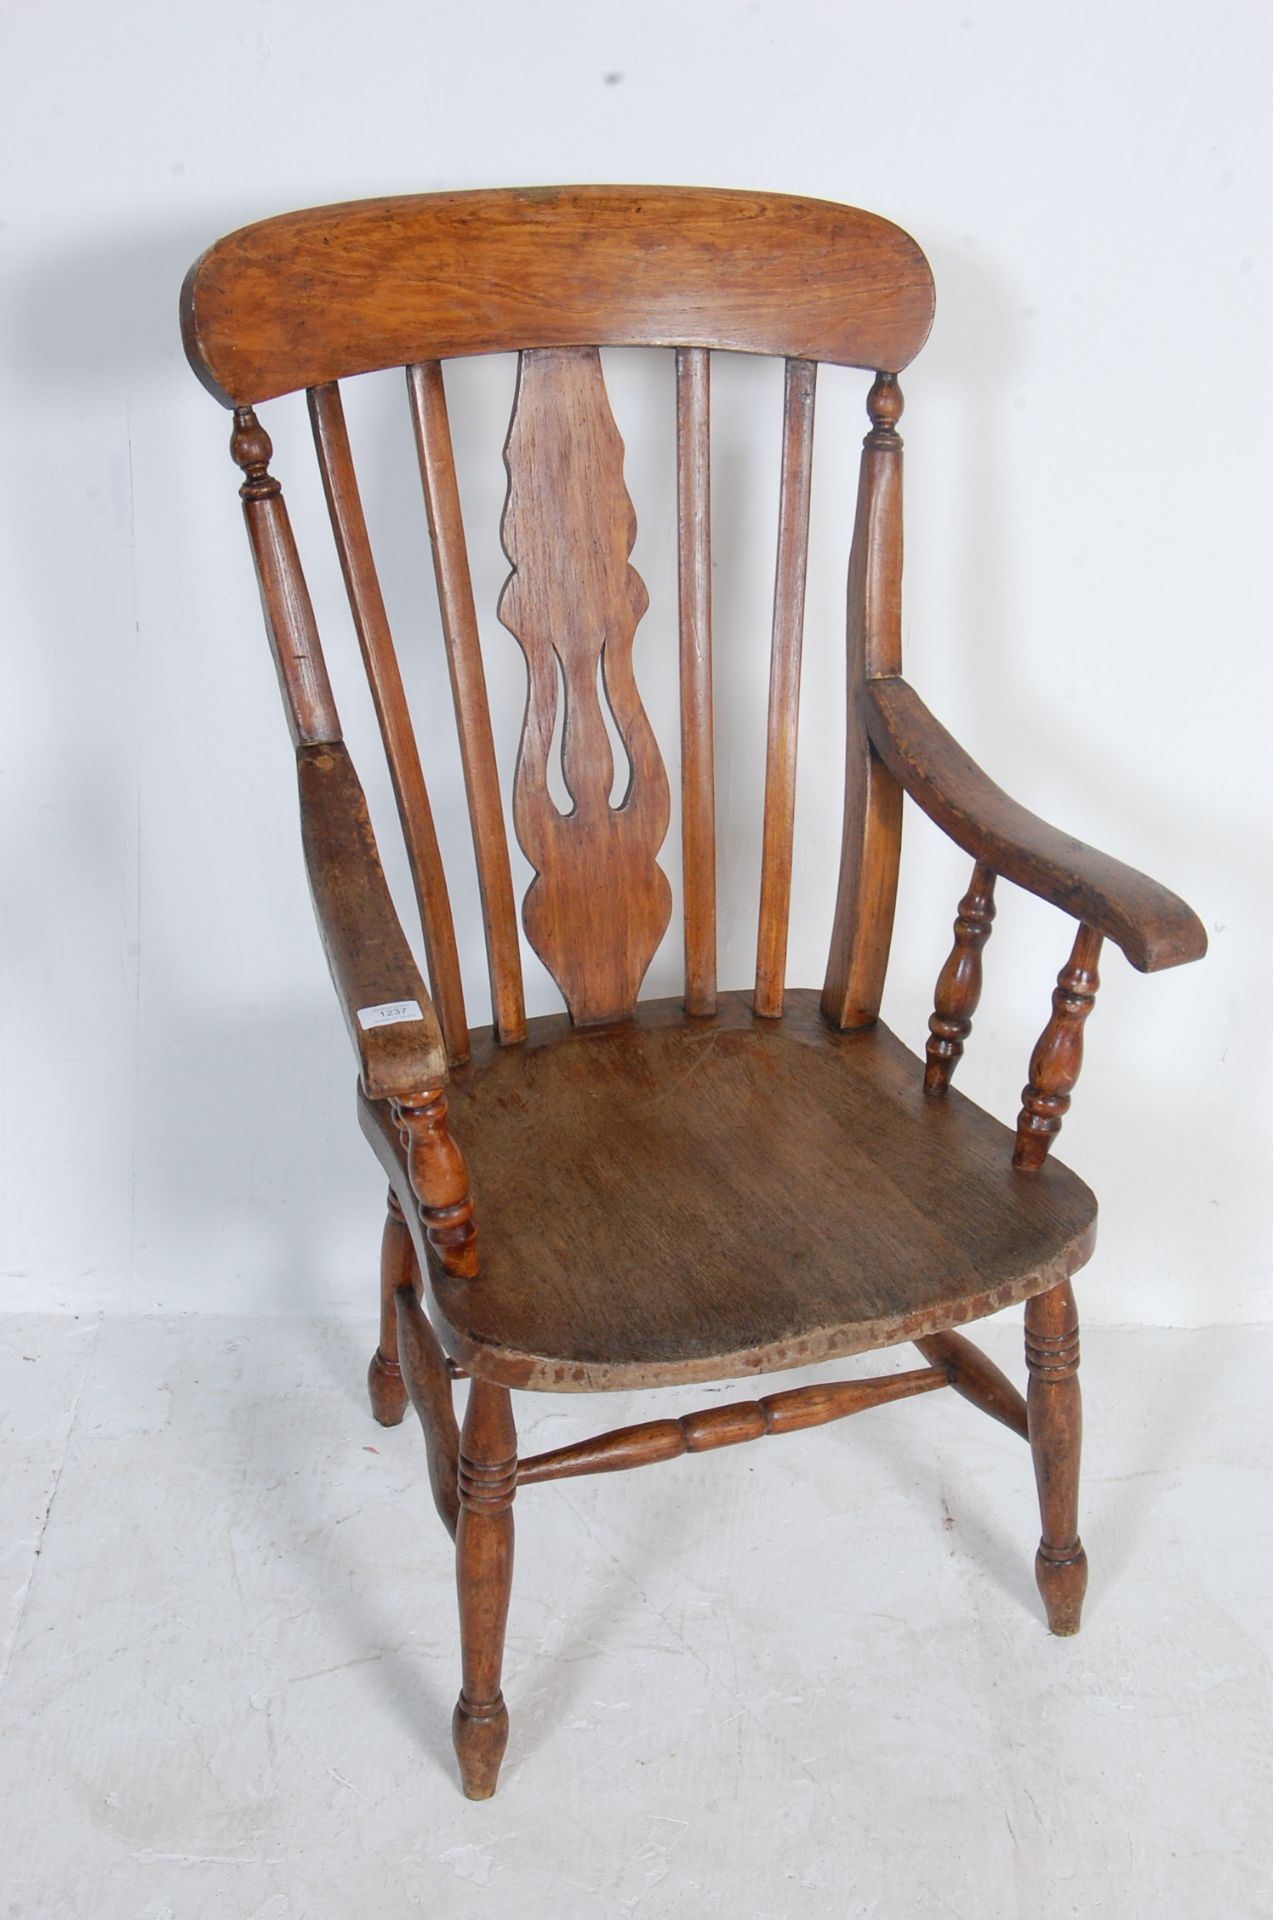 19TH CENTURY VICTORIAN BEECH AND ELM WINDSOR CHAIR - Image 2 of 7